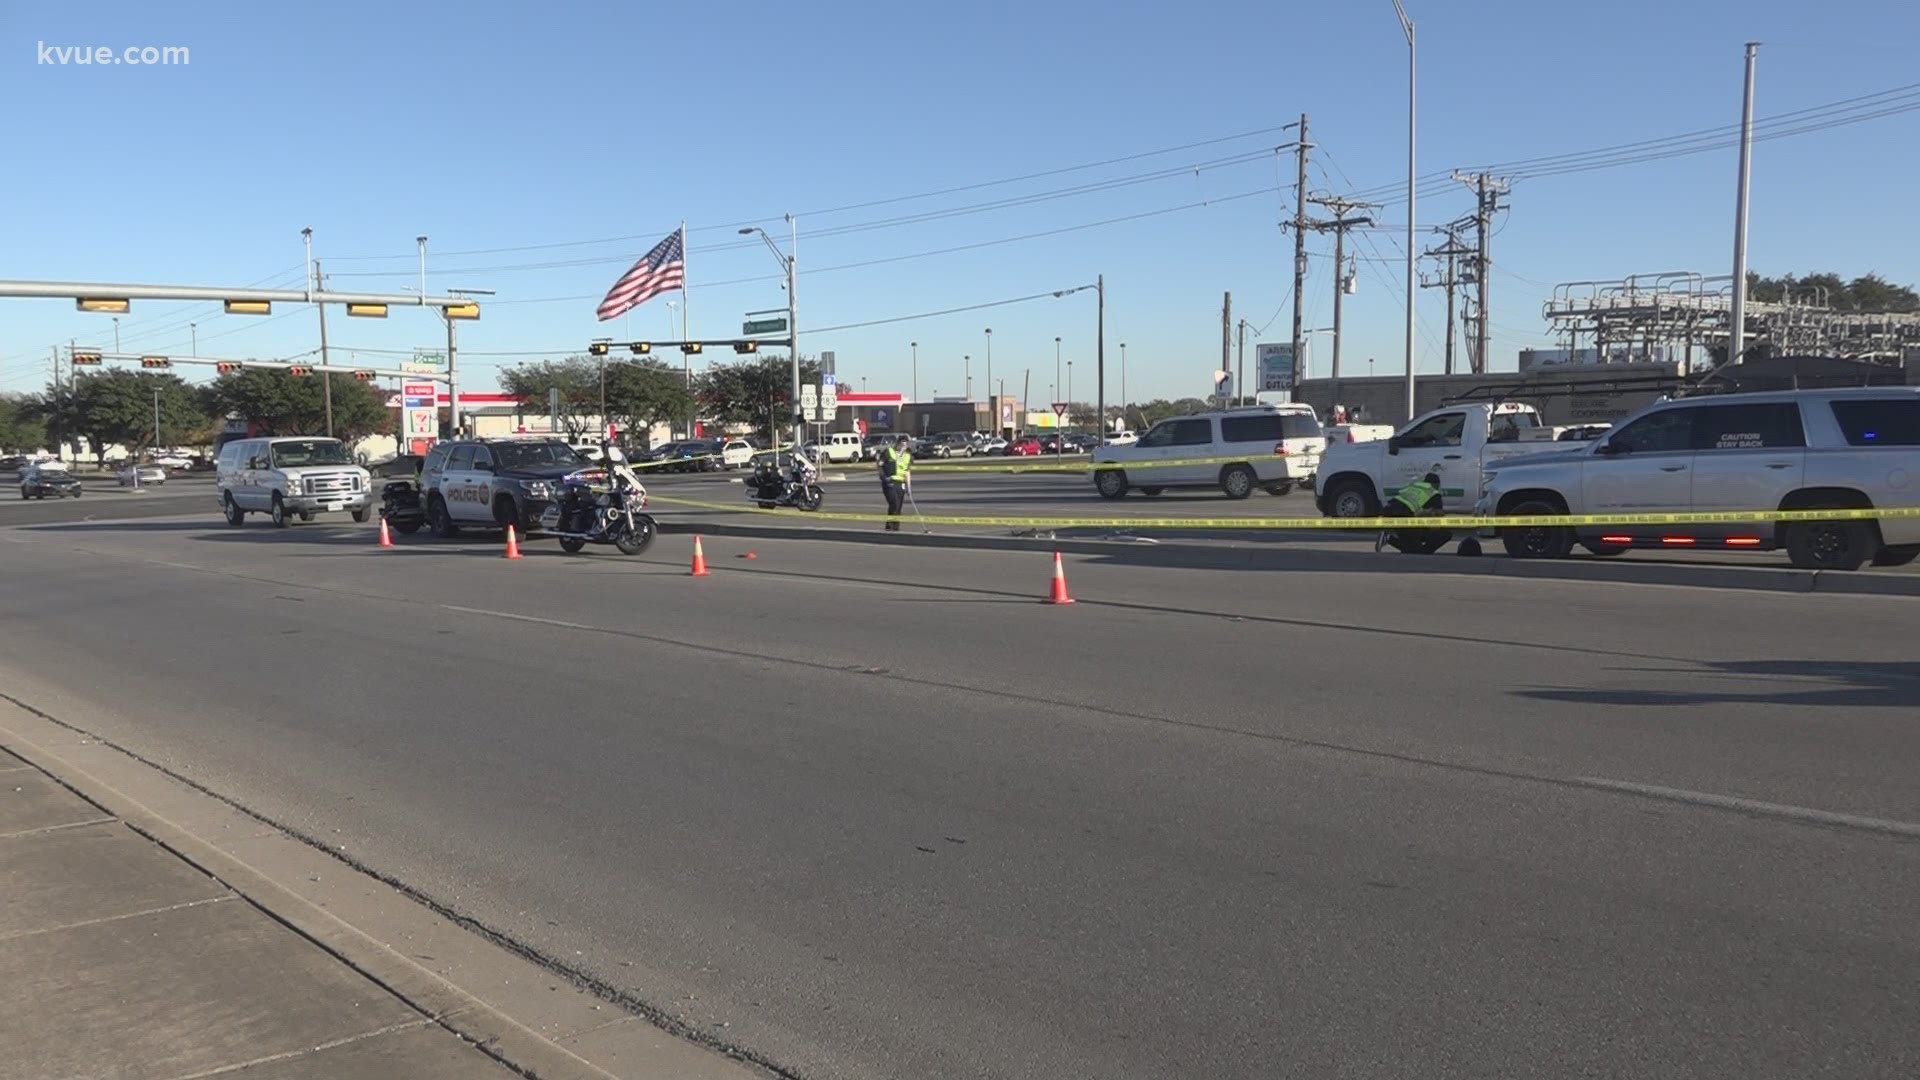 Cedar Park police say one of their K9 officers was hit by a vehicle during a pursuit Wednesday afternoon.